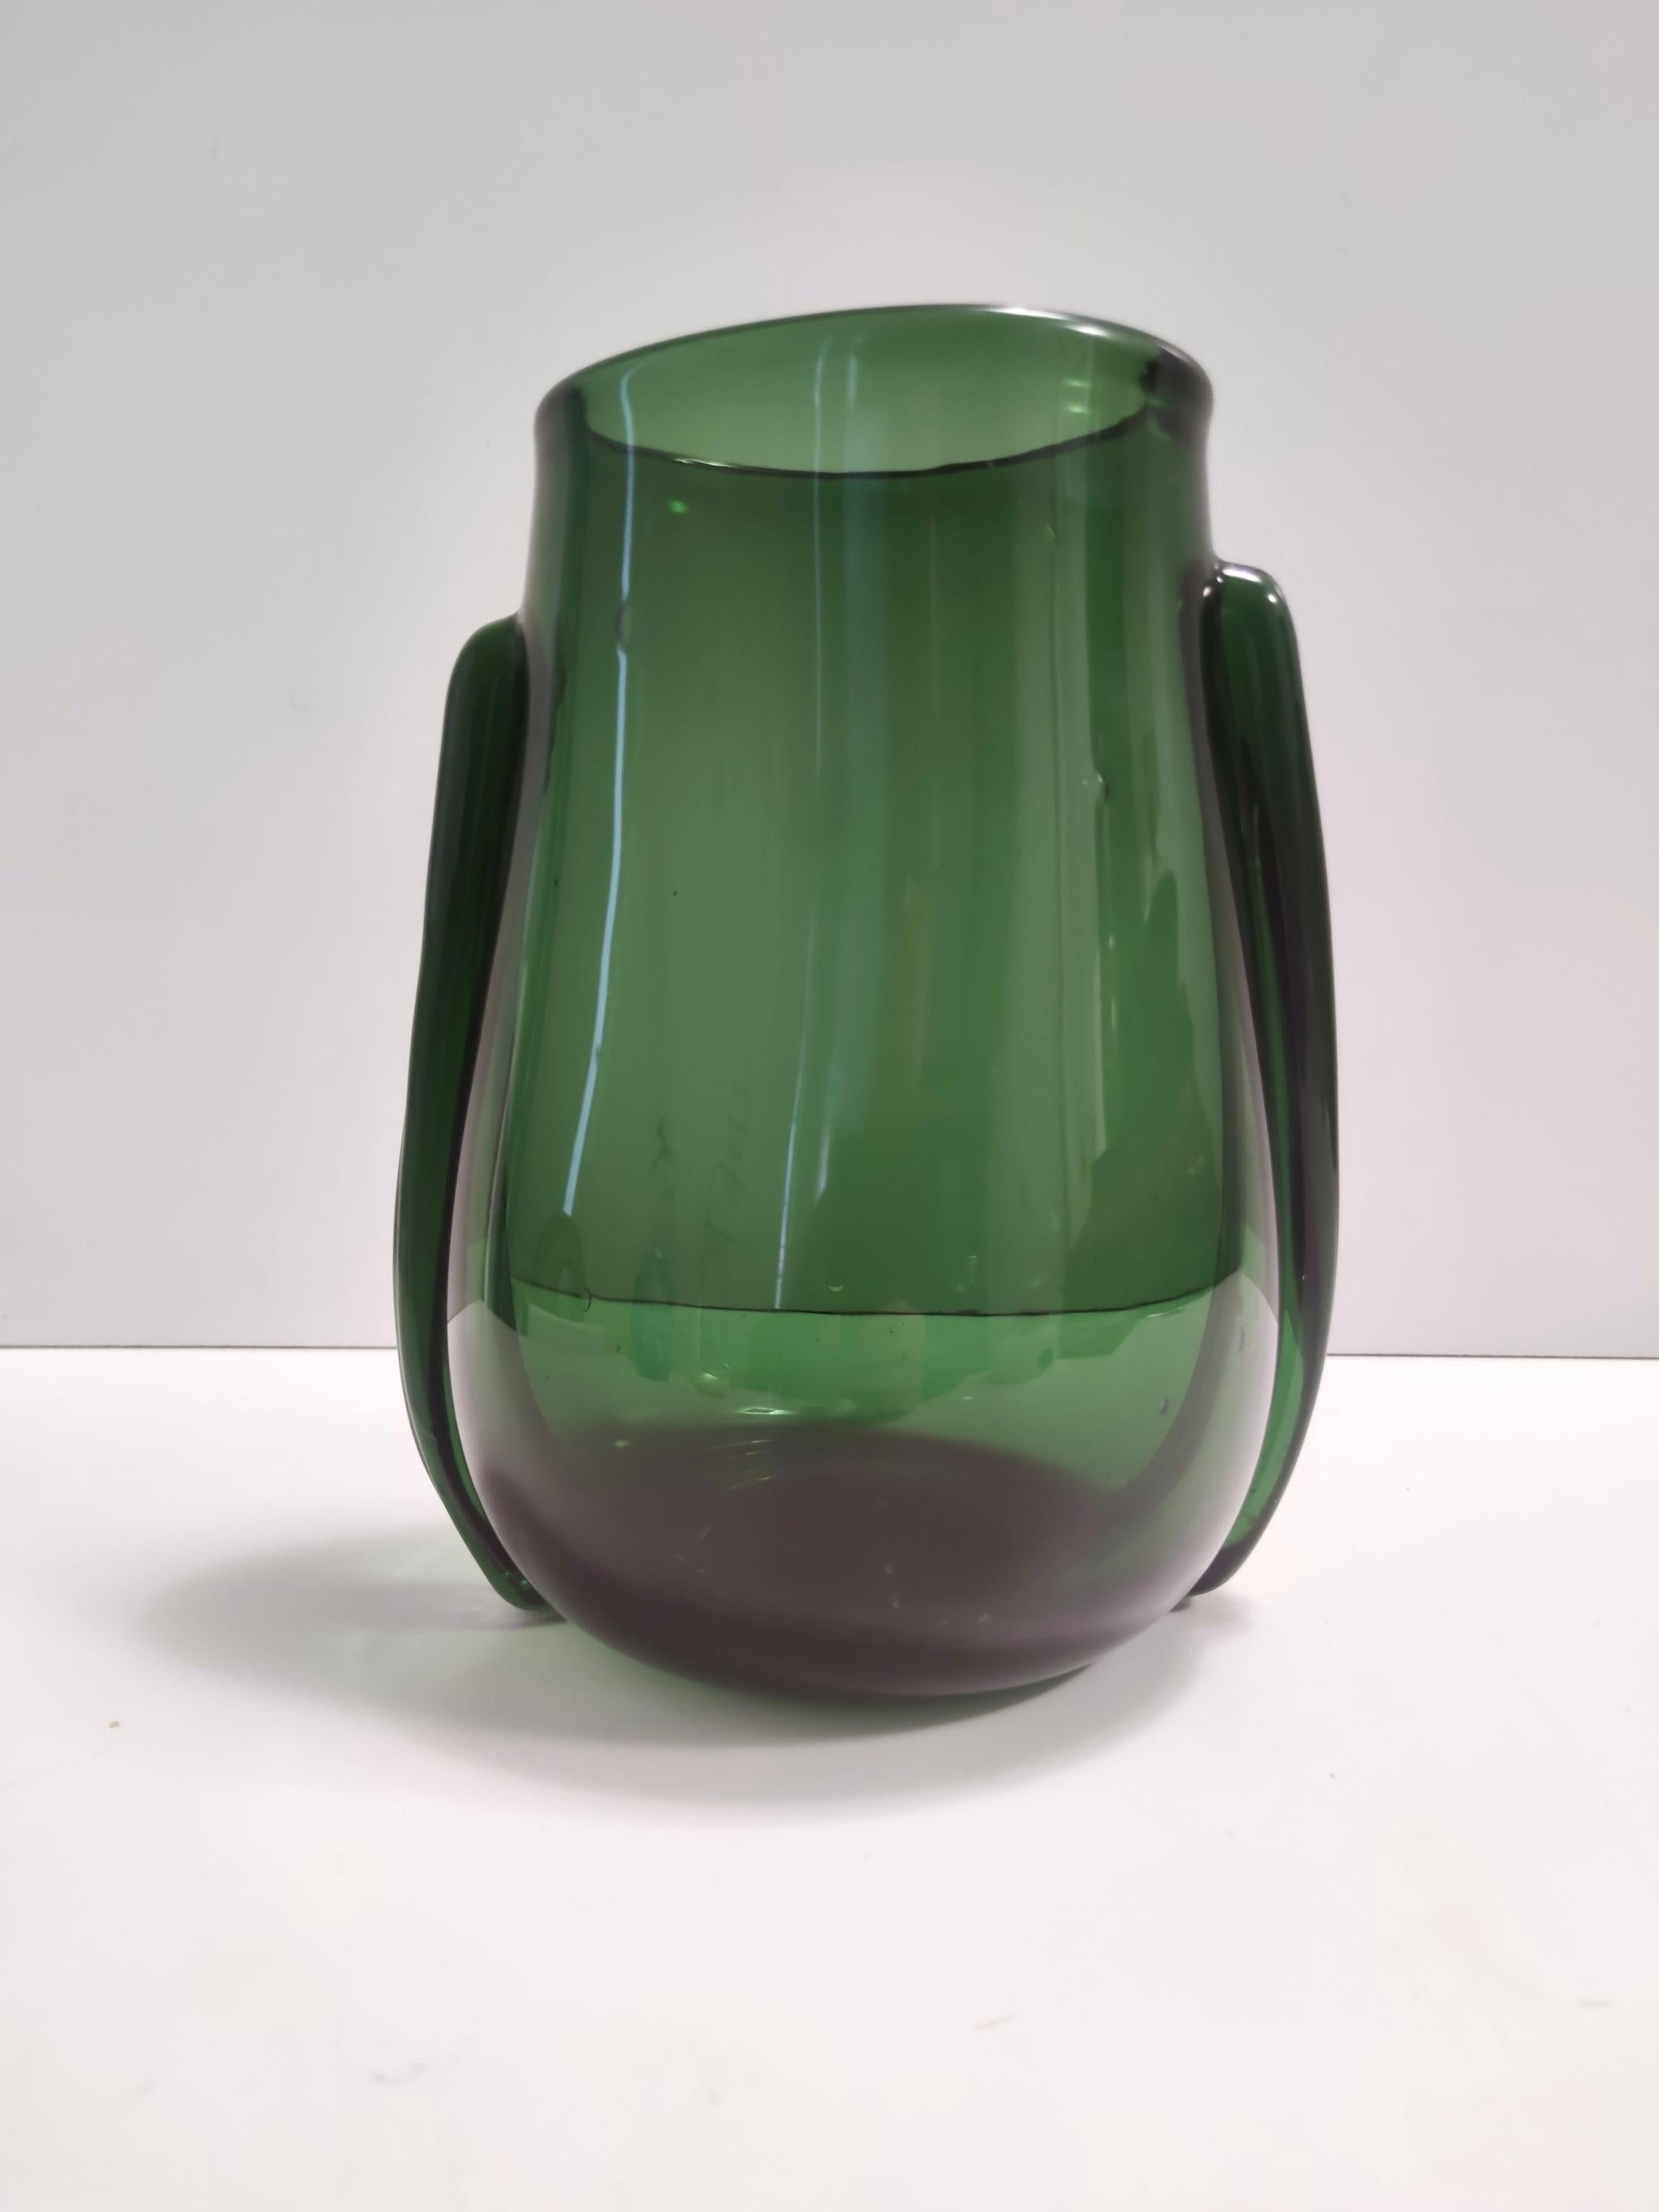 Made in Italy, 1940s - 1950s. 
Made in green hand-blown glass, in Empoli.
The glass has bubbles and pleasant transparencies due to the handcraft process. 
It is a vintage piece, therefore it might show slight traces of use, but it can be considered